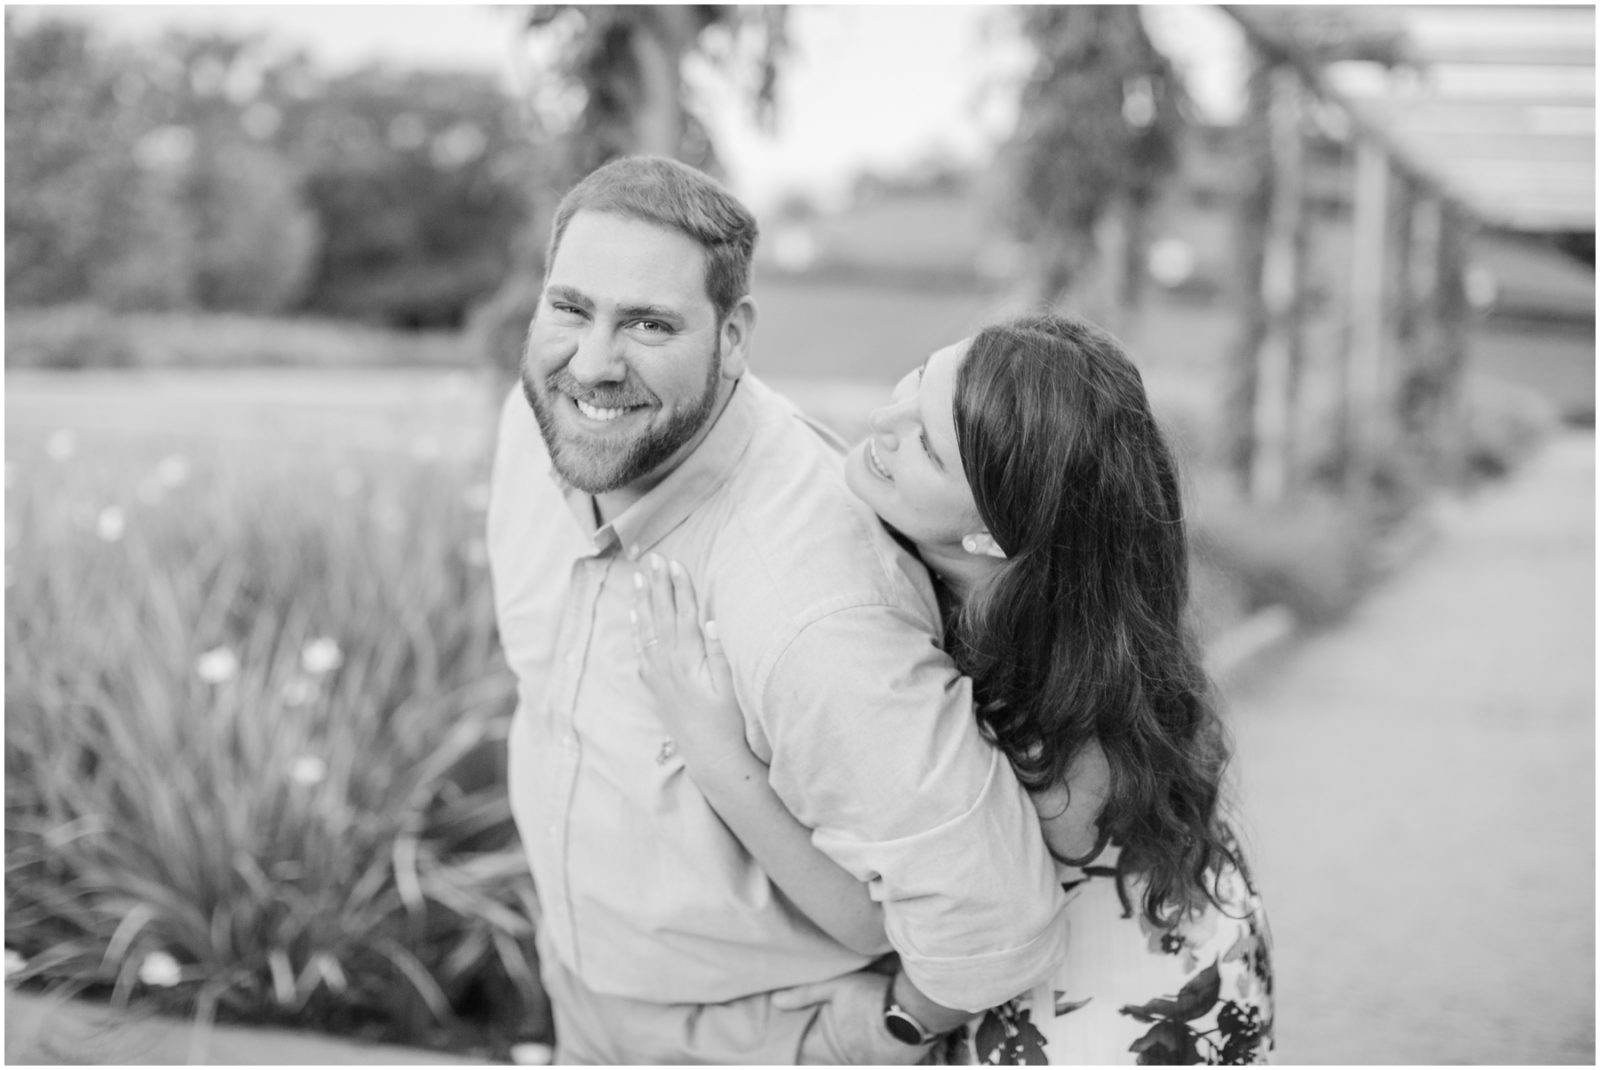 Ron + Jessica | Summer Engagement Session at McGovern Centennial ...